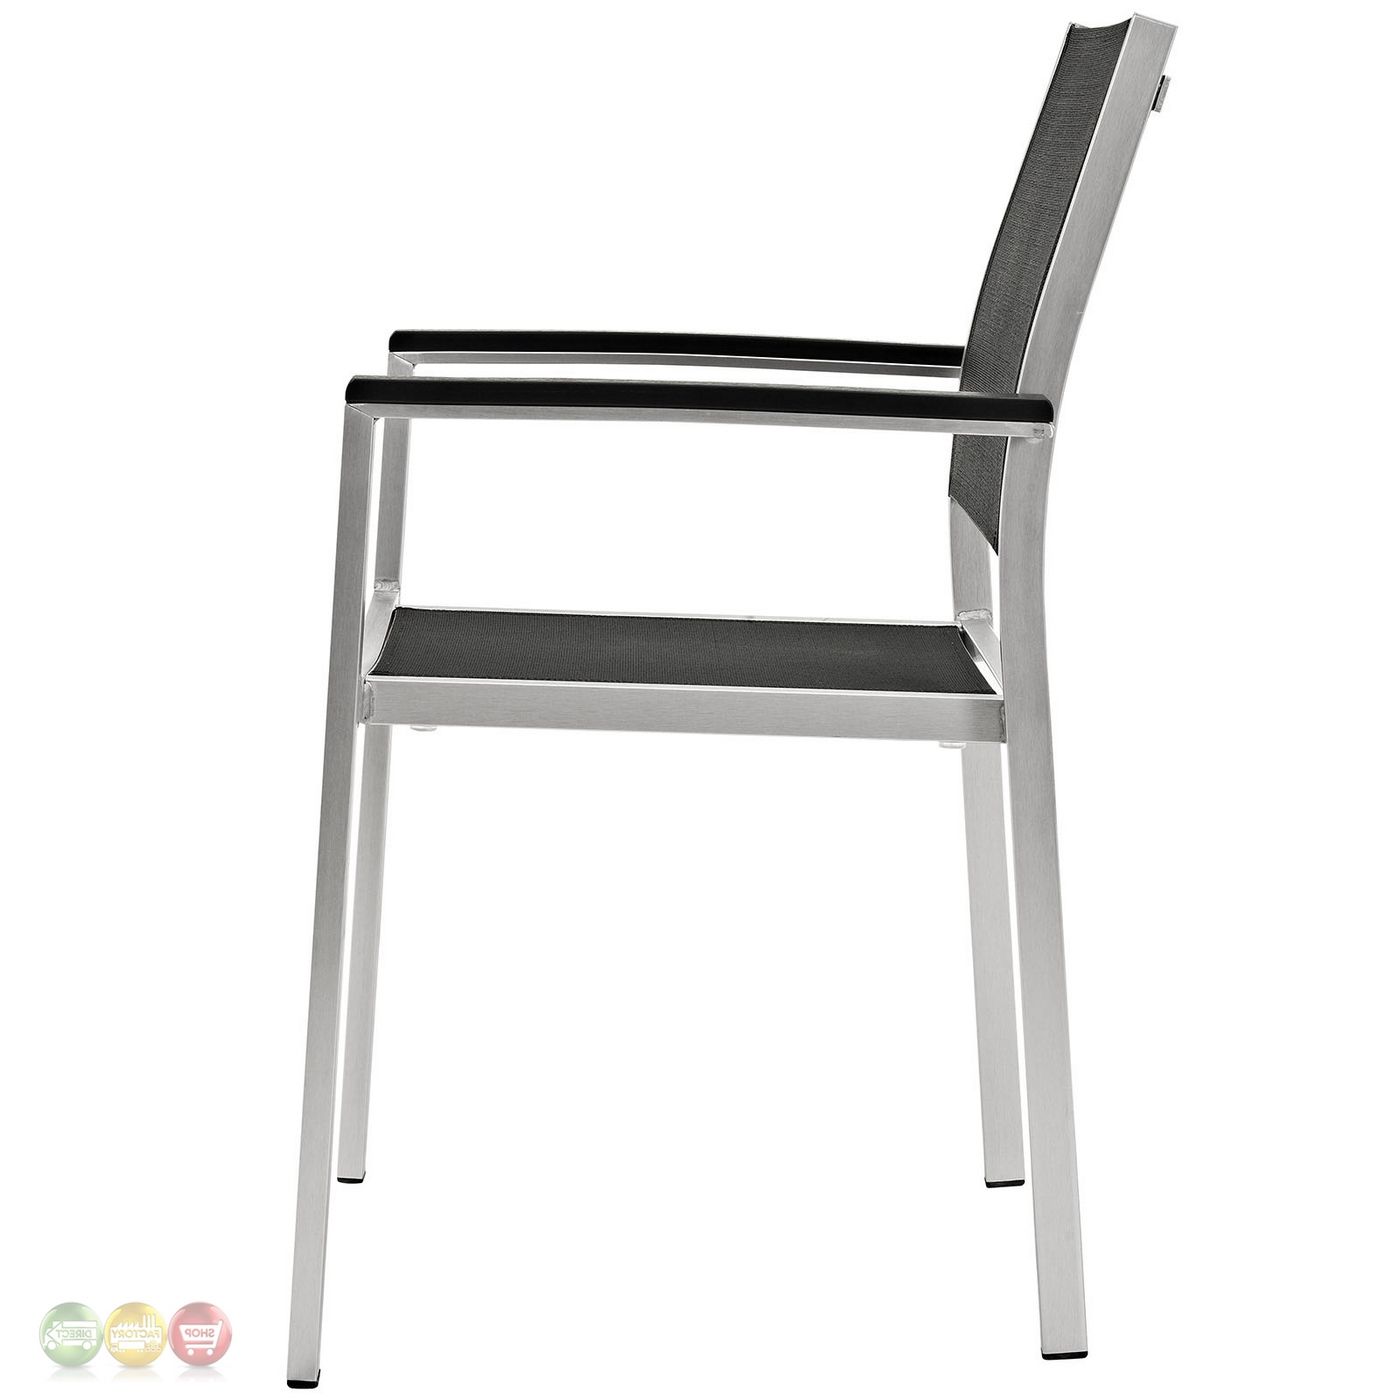 Shore Outdoor Patio Aluminum Dining Chair W/ Breathable Mesh Fabric Intended For Most Recently Released Brushed Aluminum Outdoor Armchair Sets (View 10 of 15)